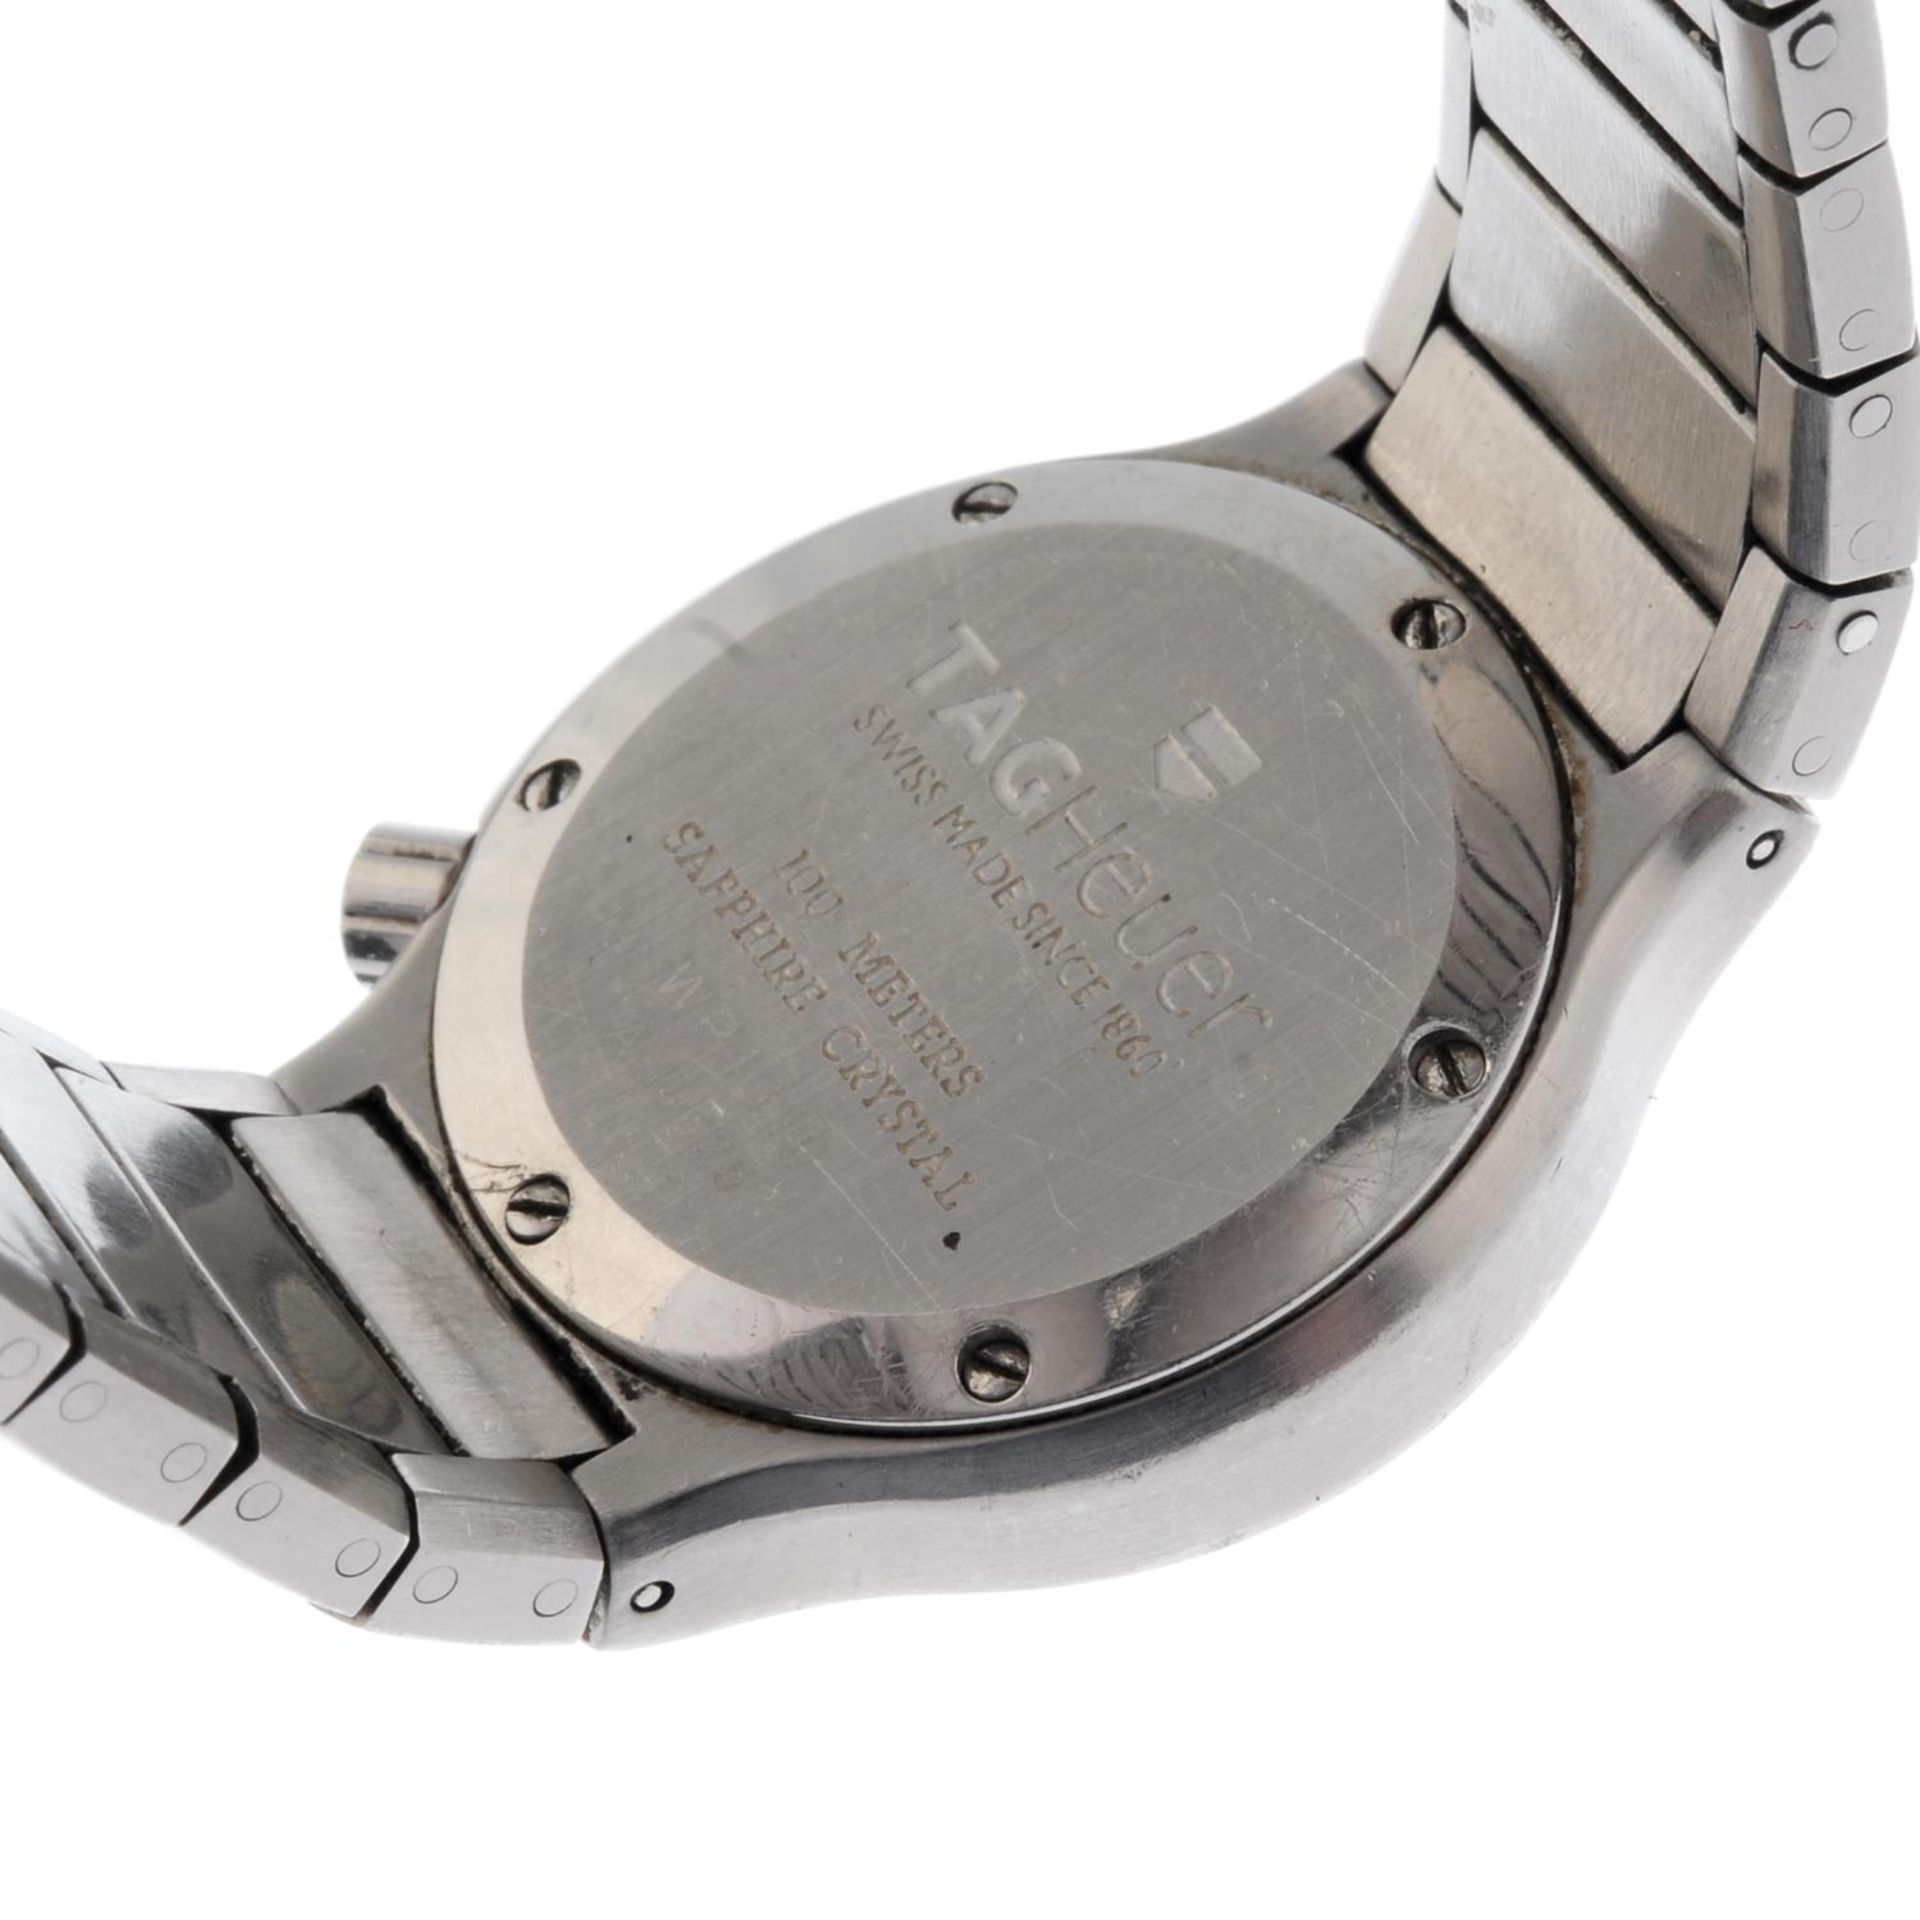 TAG HEUER - an Alter Ego bracelet watch. - Image 4 of 4